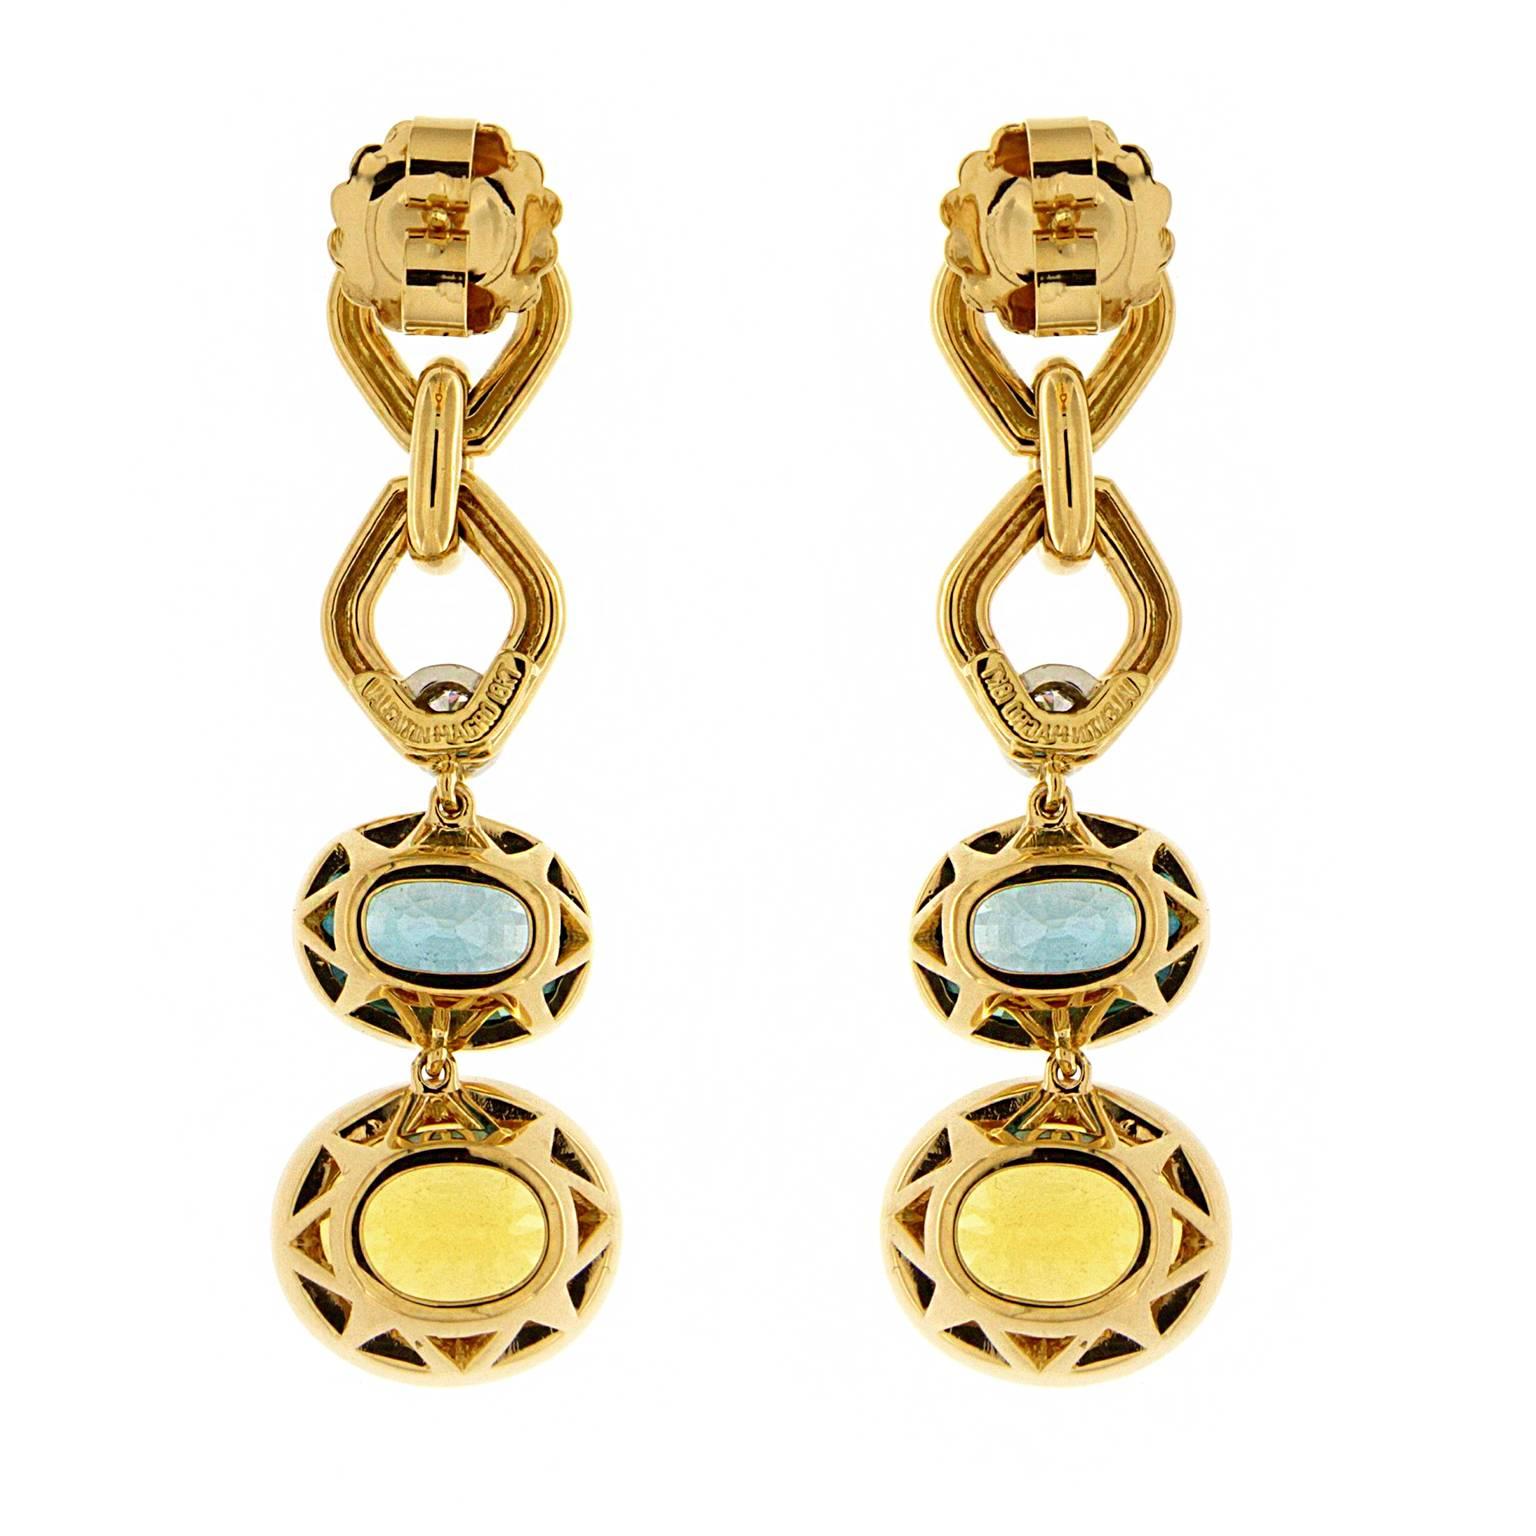 These lovely earrings feature Blue Zircon and Yellow Beryl with Round Brilliant cut Diamonds in 18kt Yellow Gold. Diamond weight 0.57 cts.